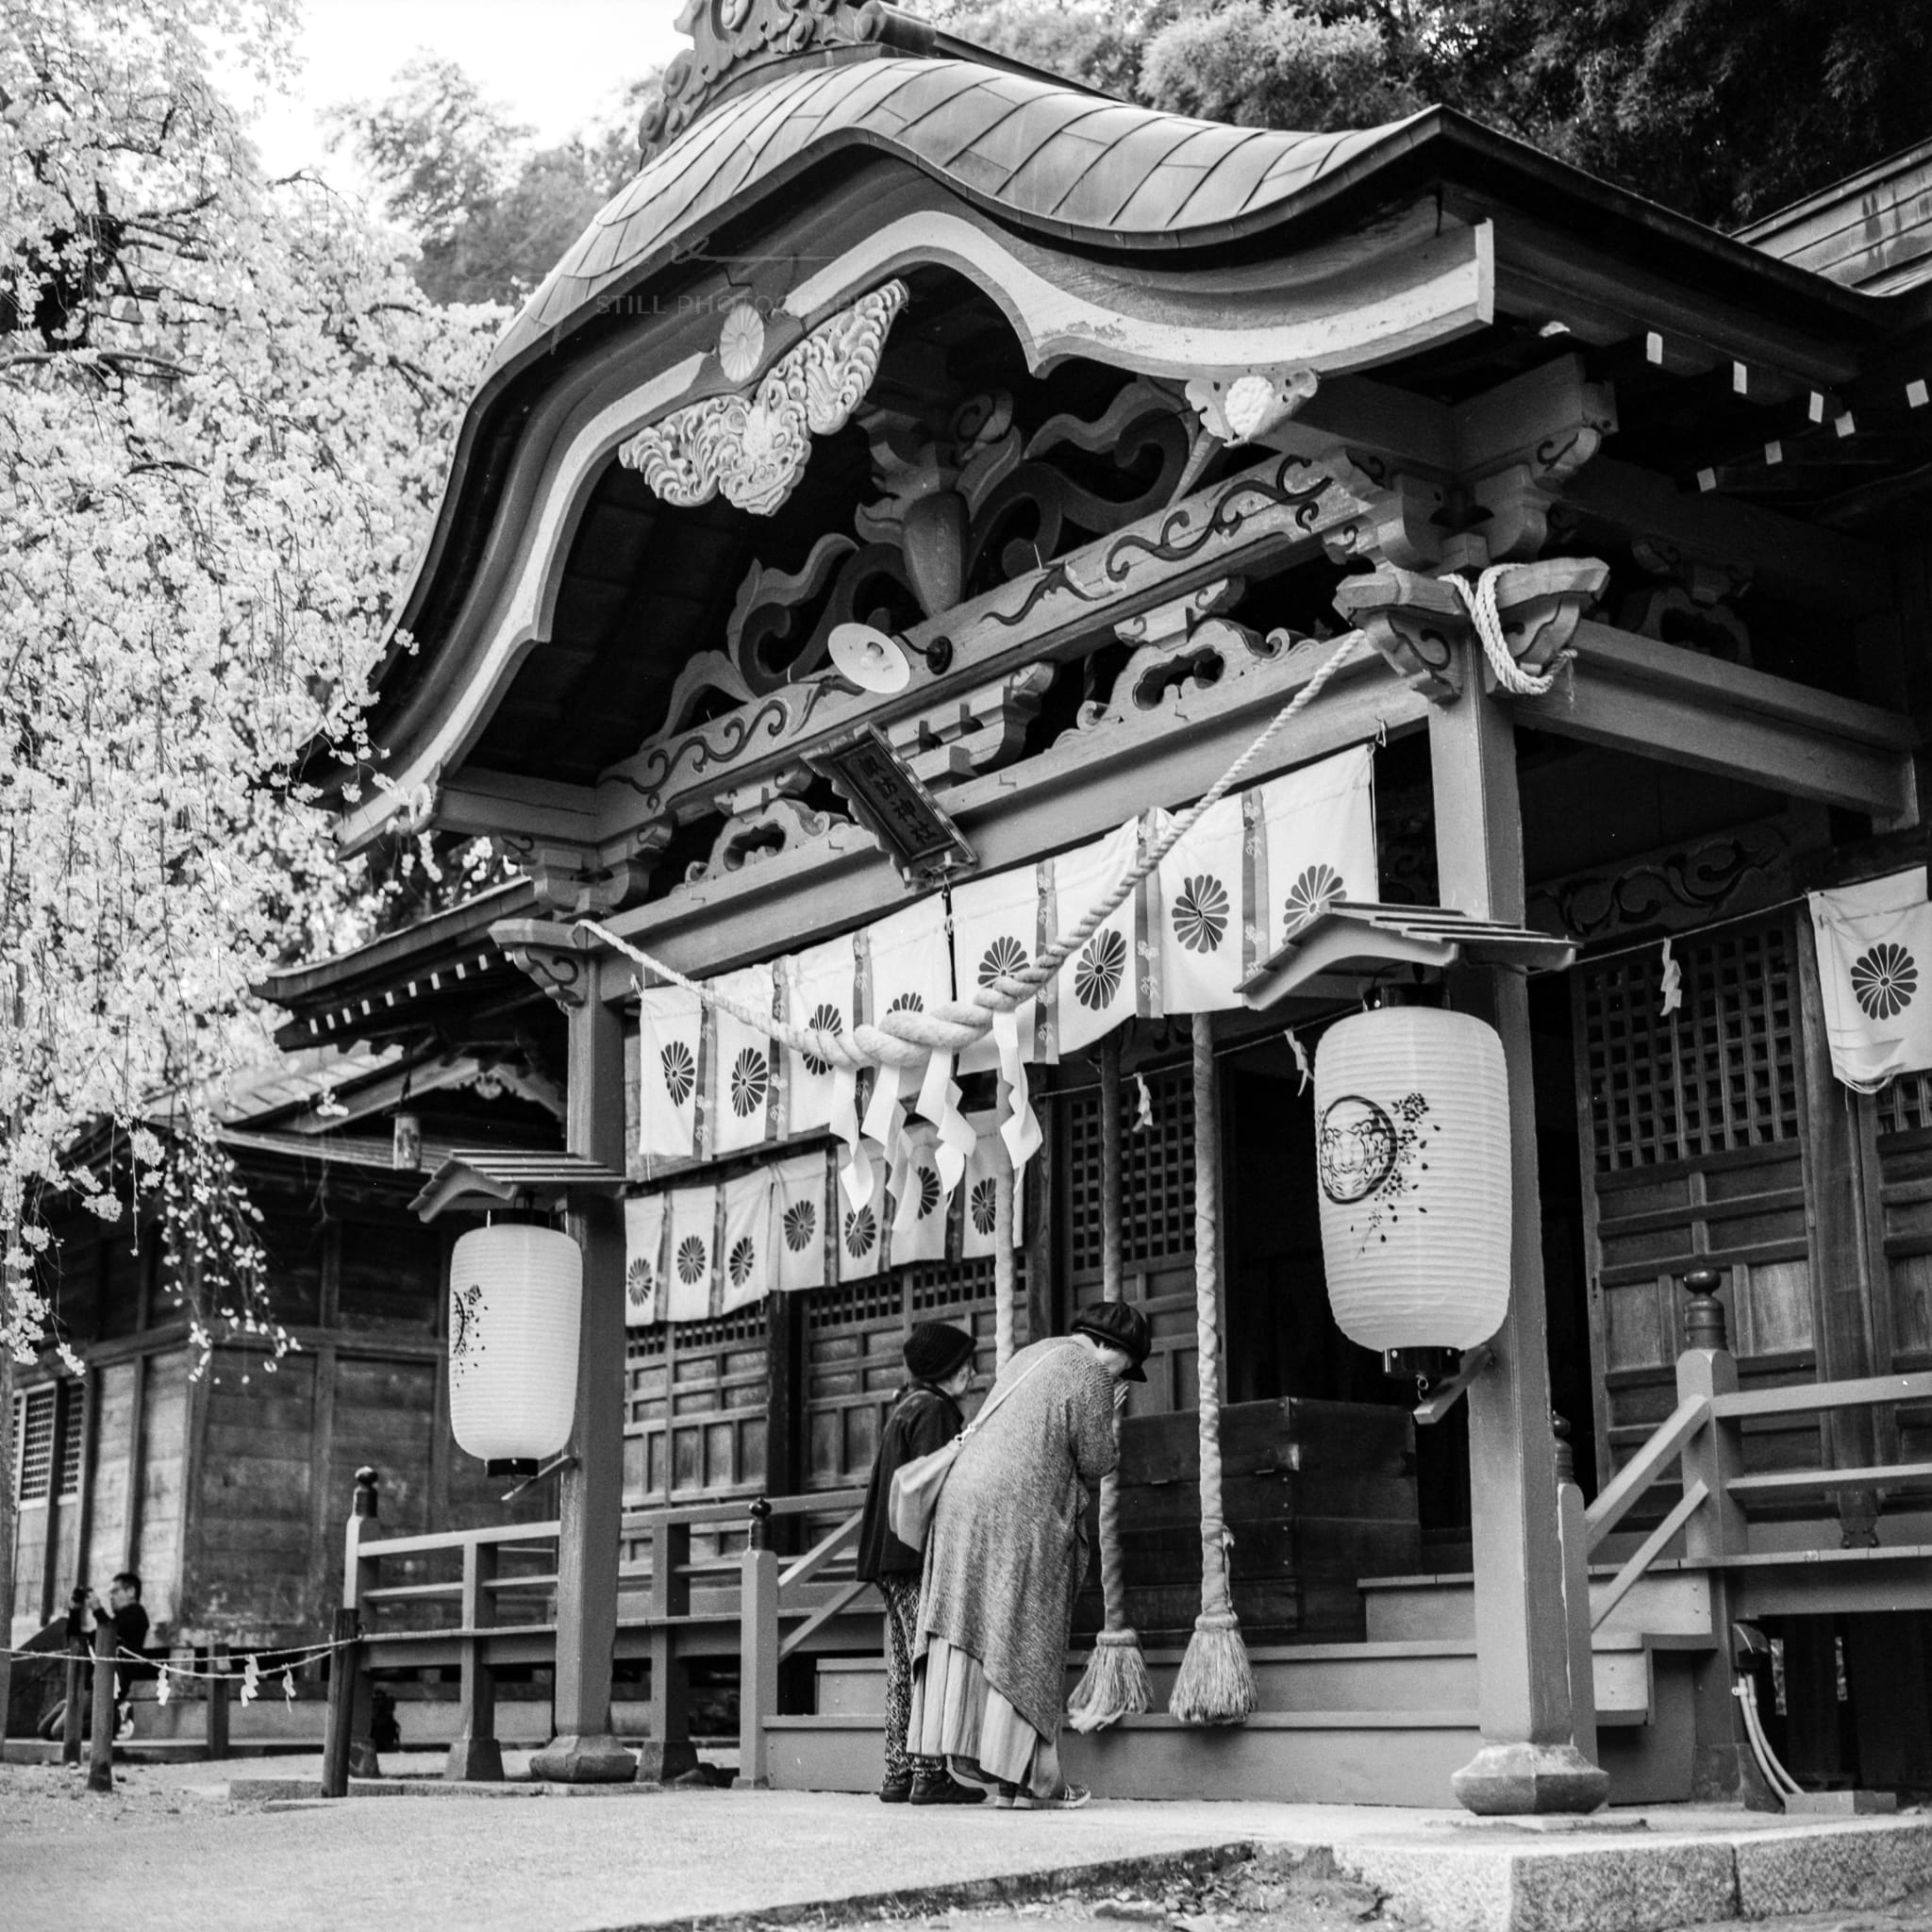 Traditional Japanese shrine with lanterns and cherry blossoms in black and white photography.